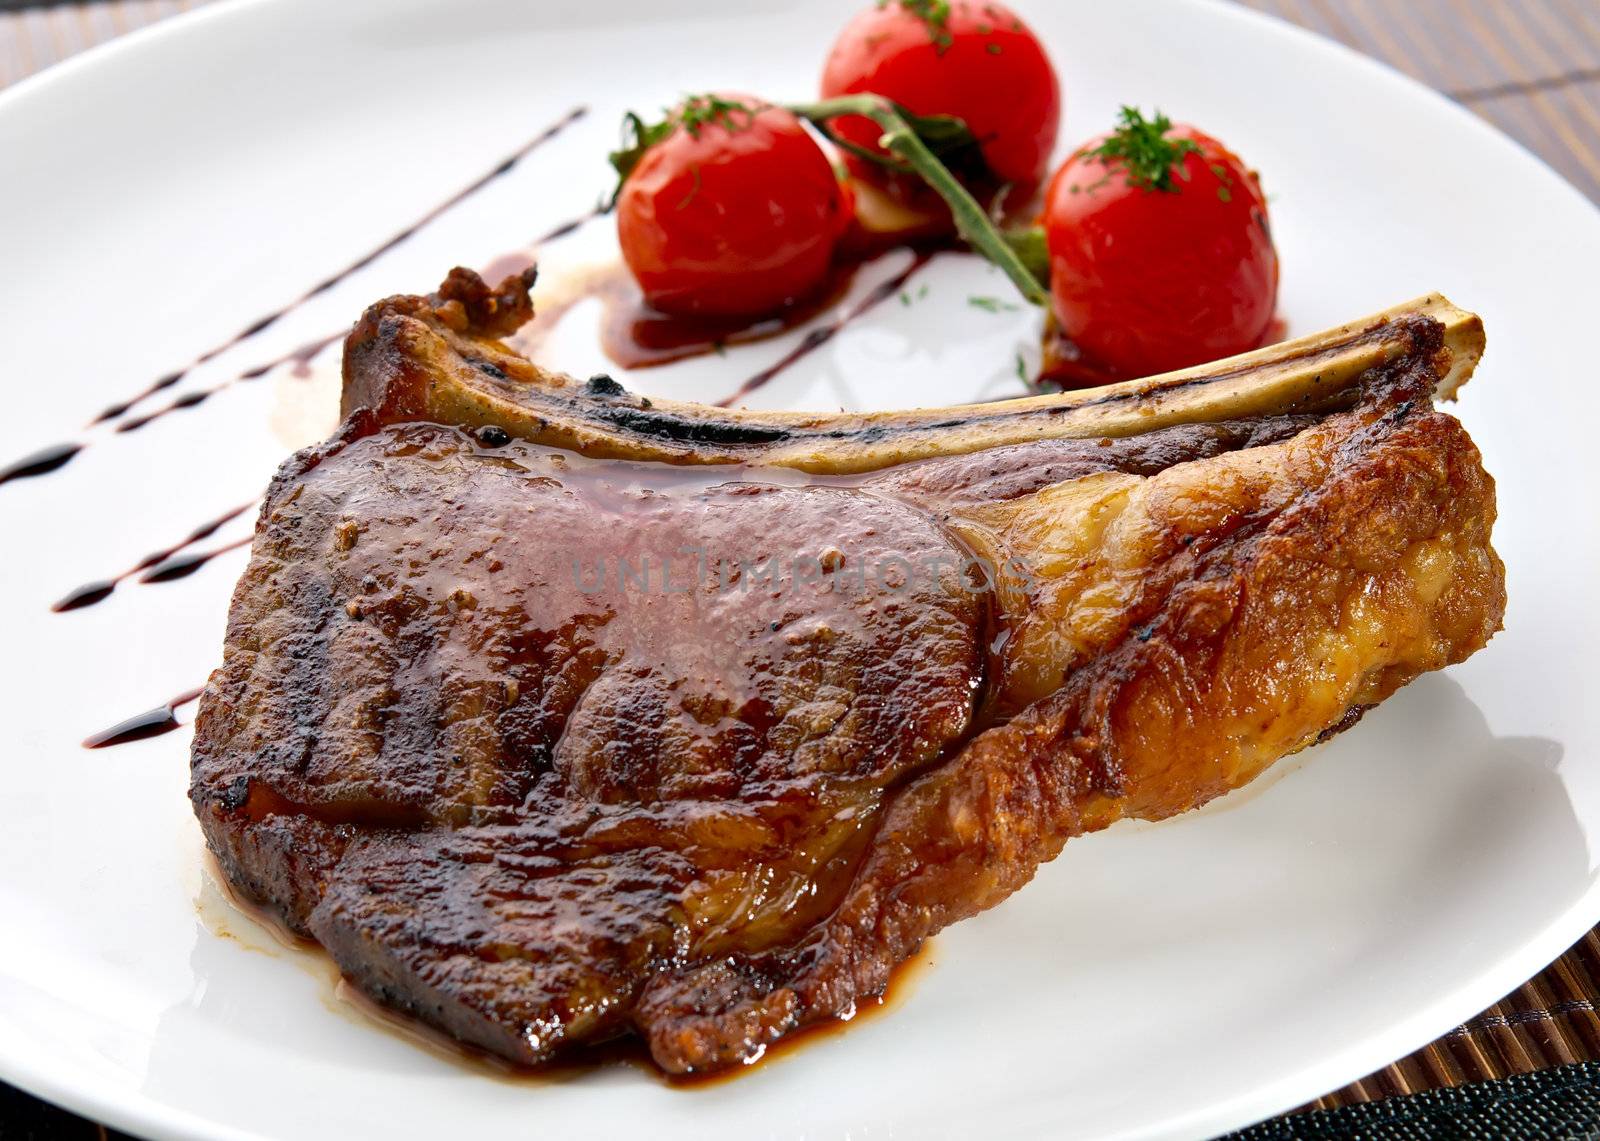 Grilled meat ribs on white plate with tomatoes by kirs-ua